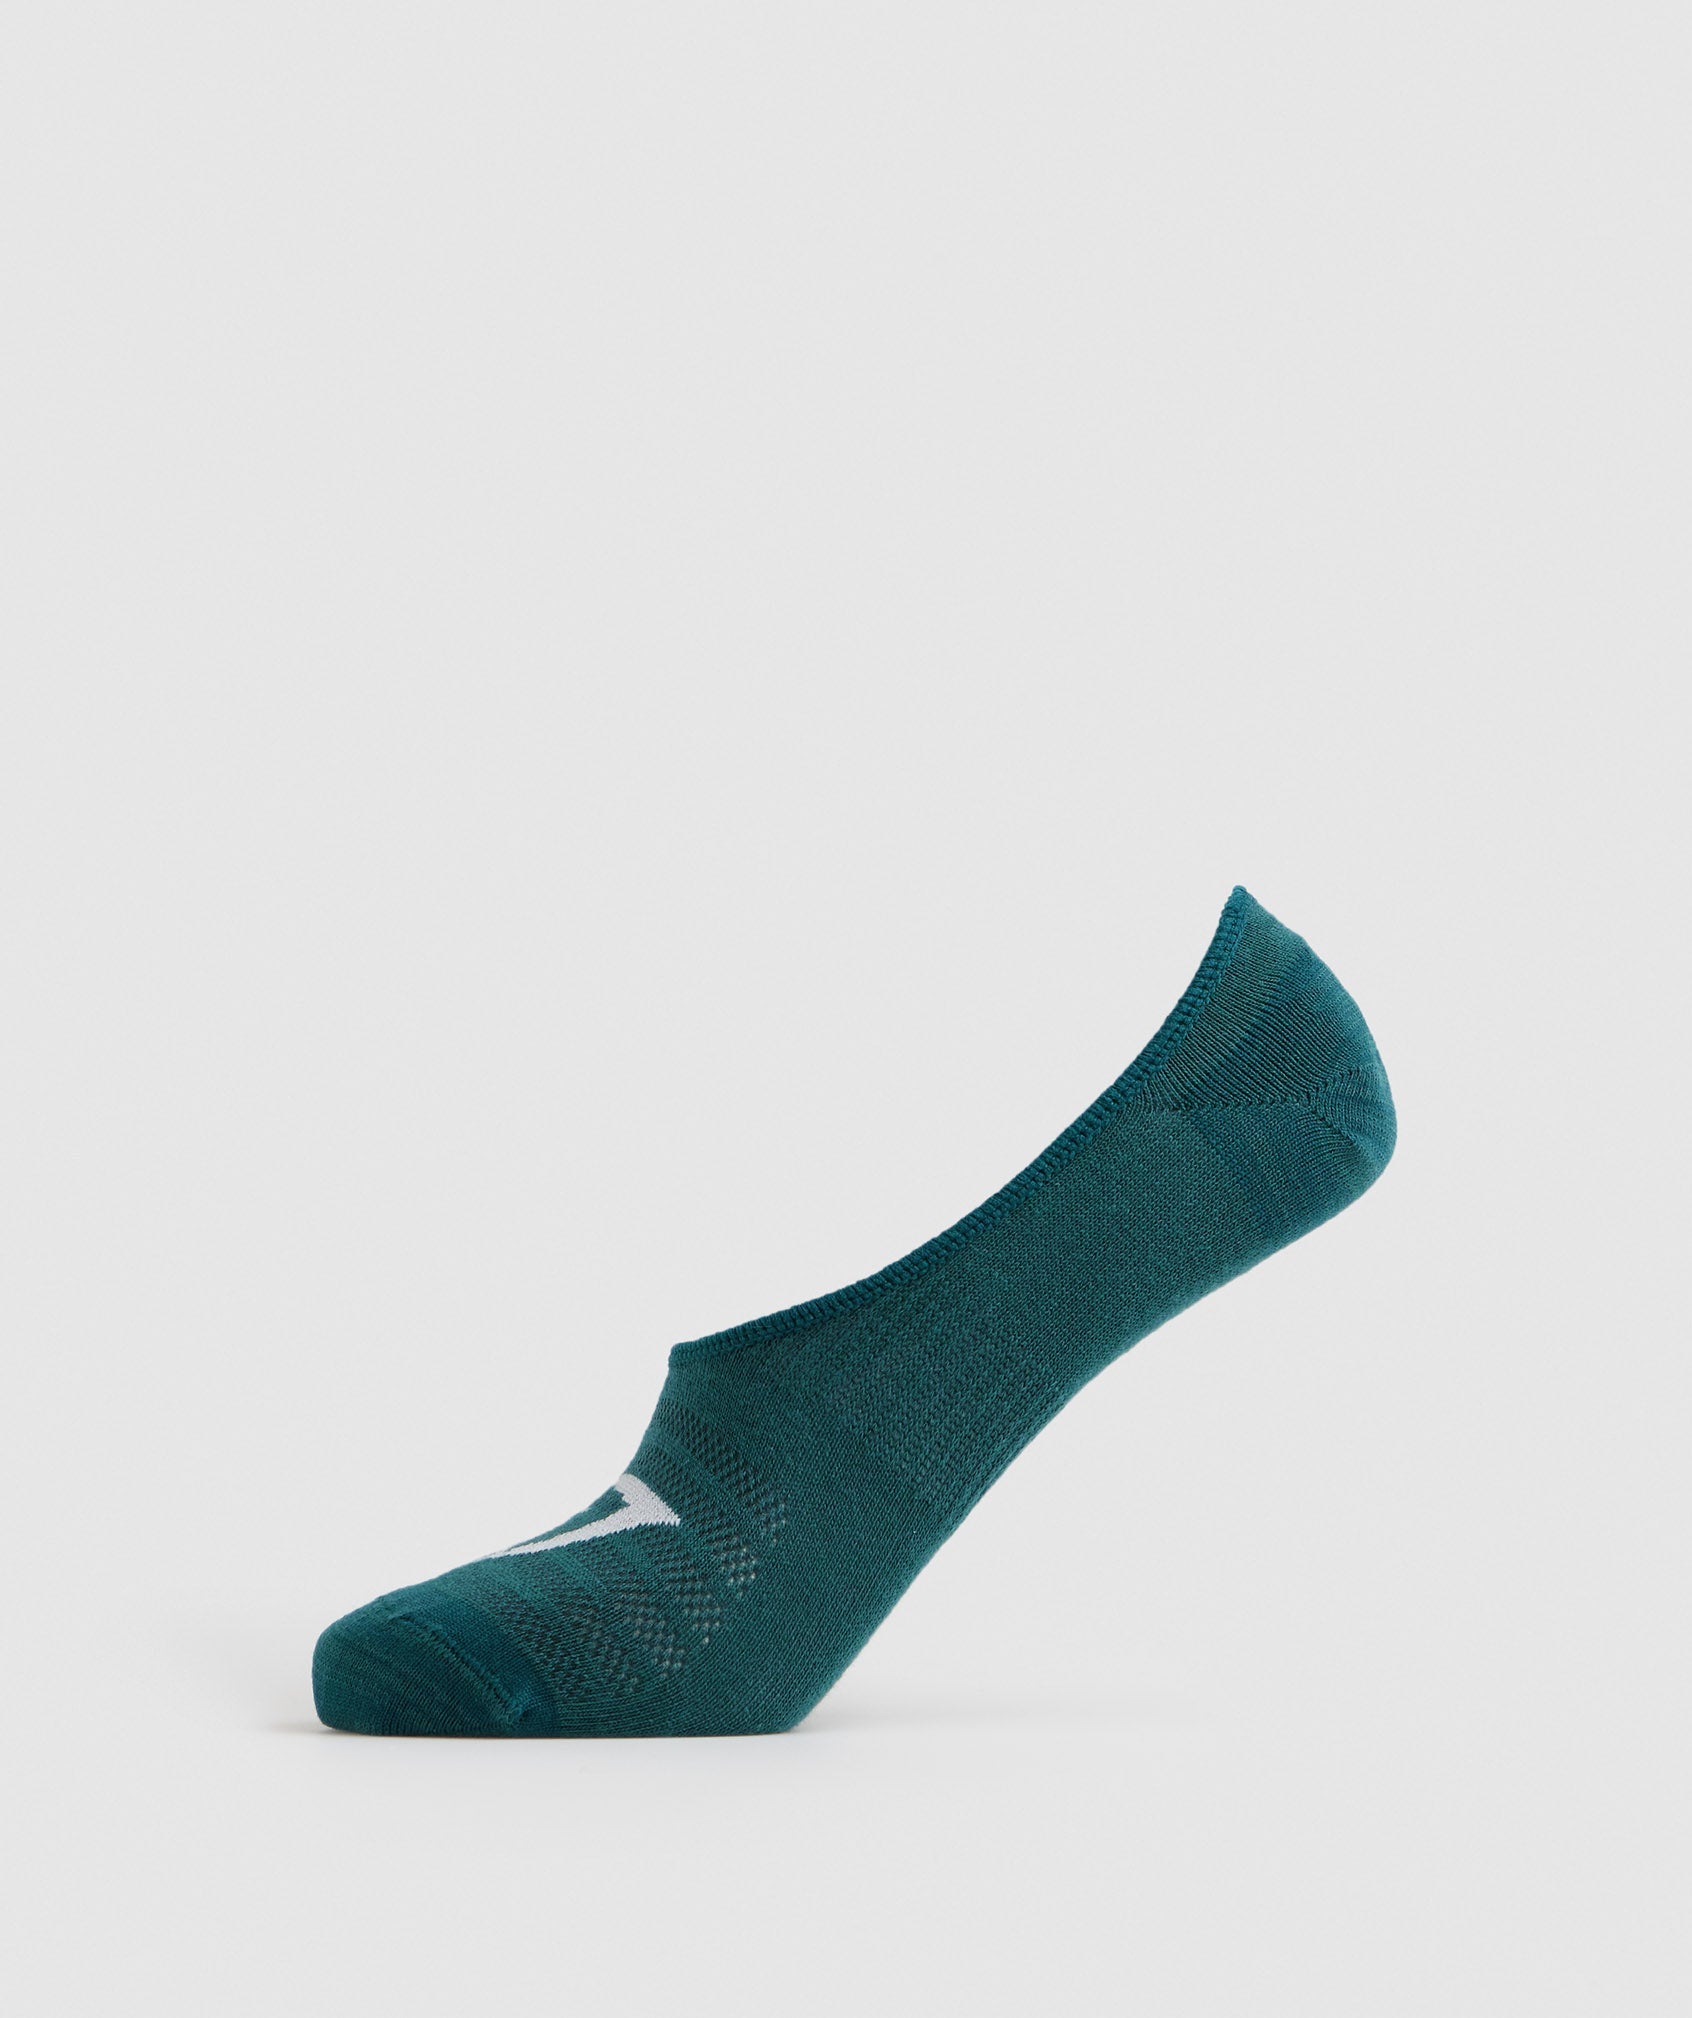 No Show Socks 3pk in Winter Teal/Pearl Blue/White - view 3